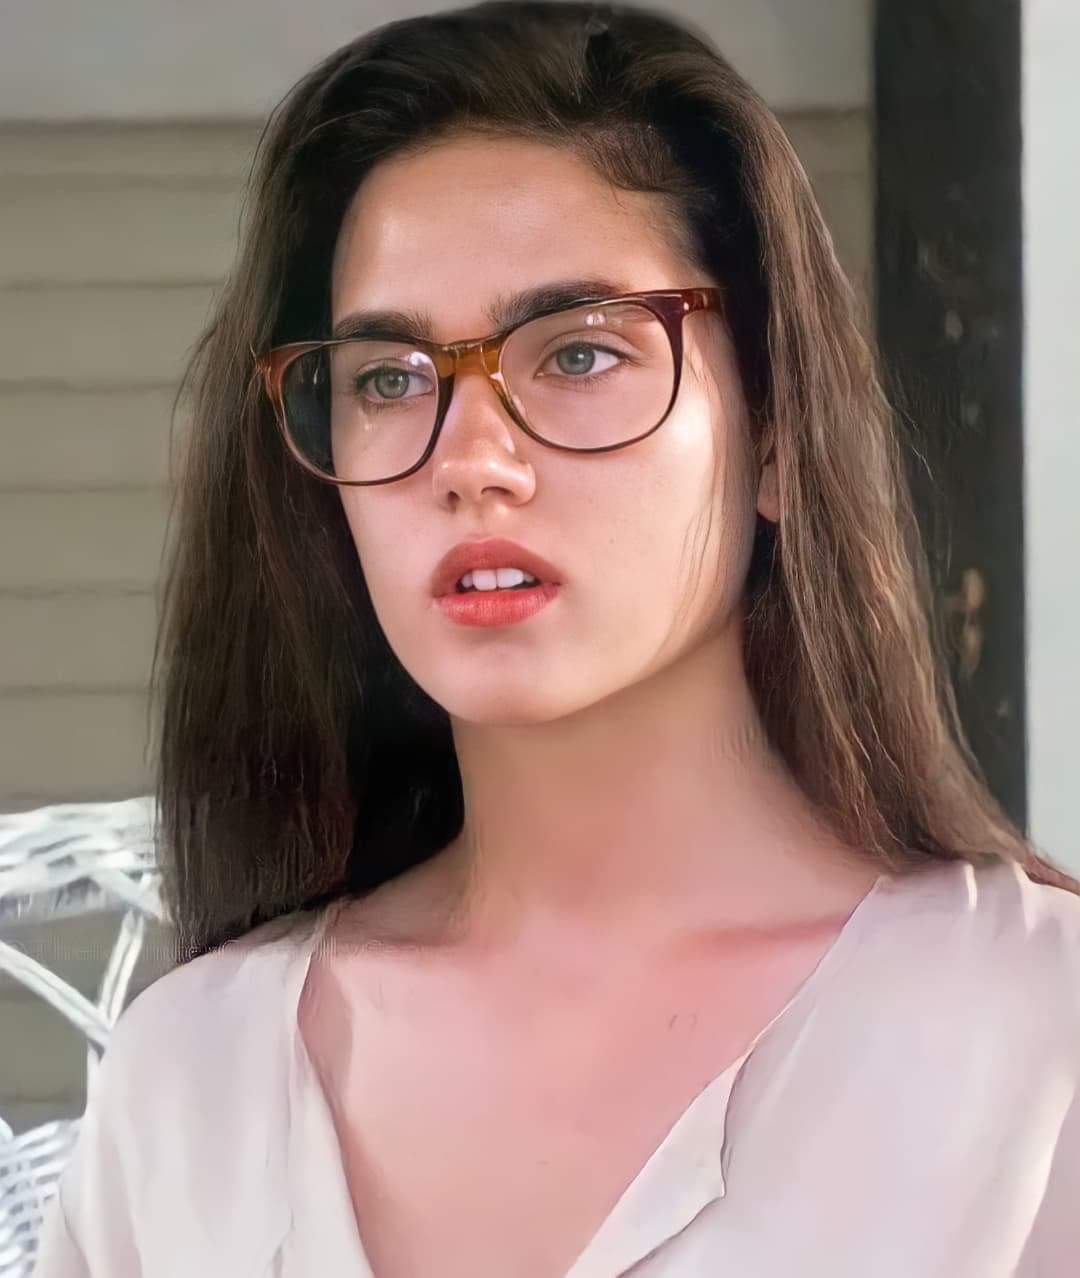 Jennifer Connelly in the 90s